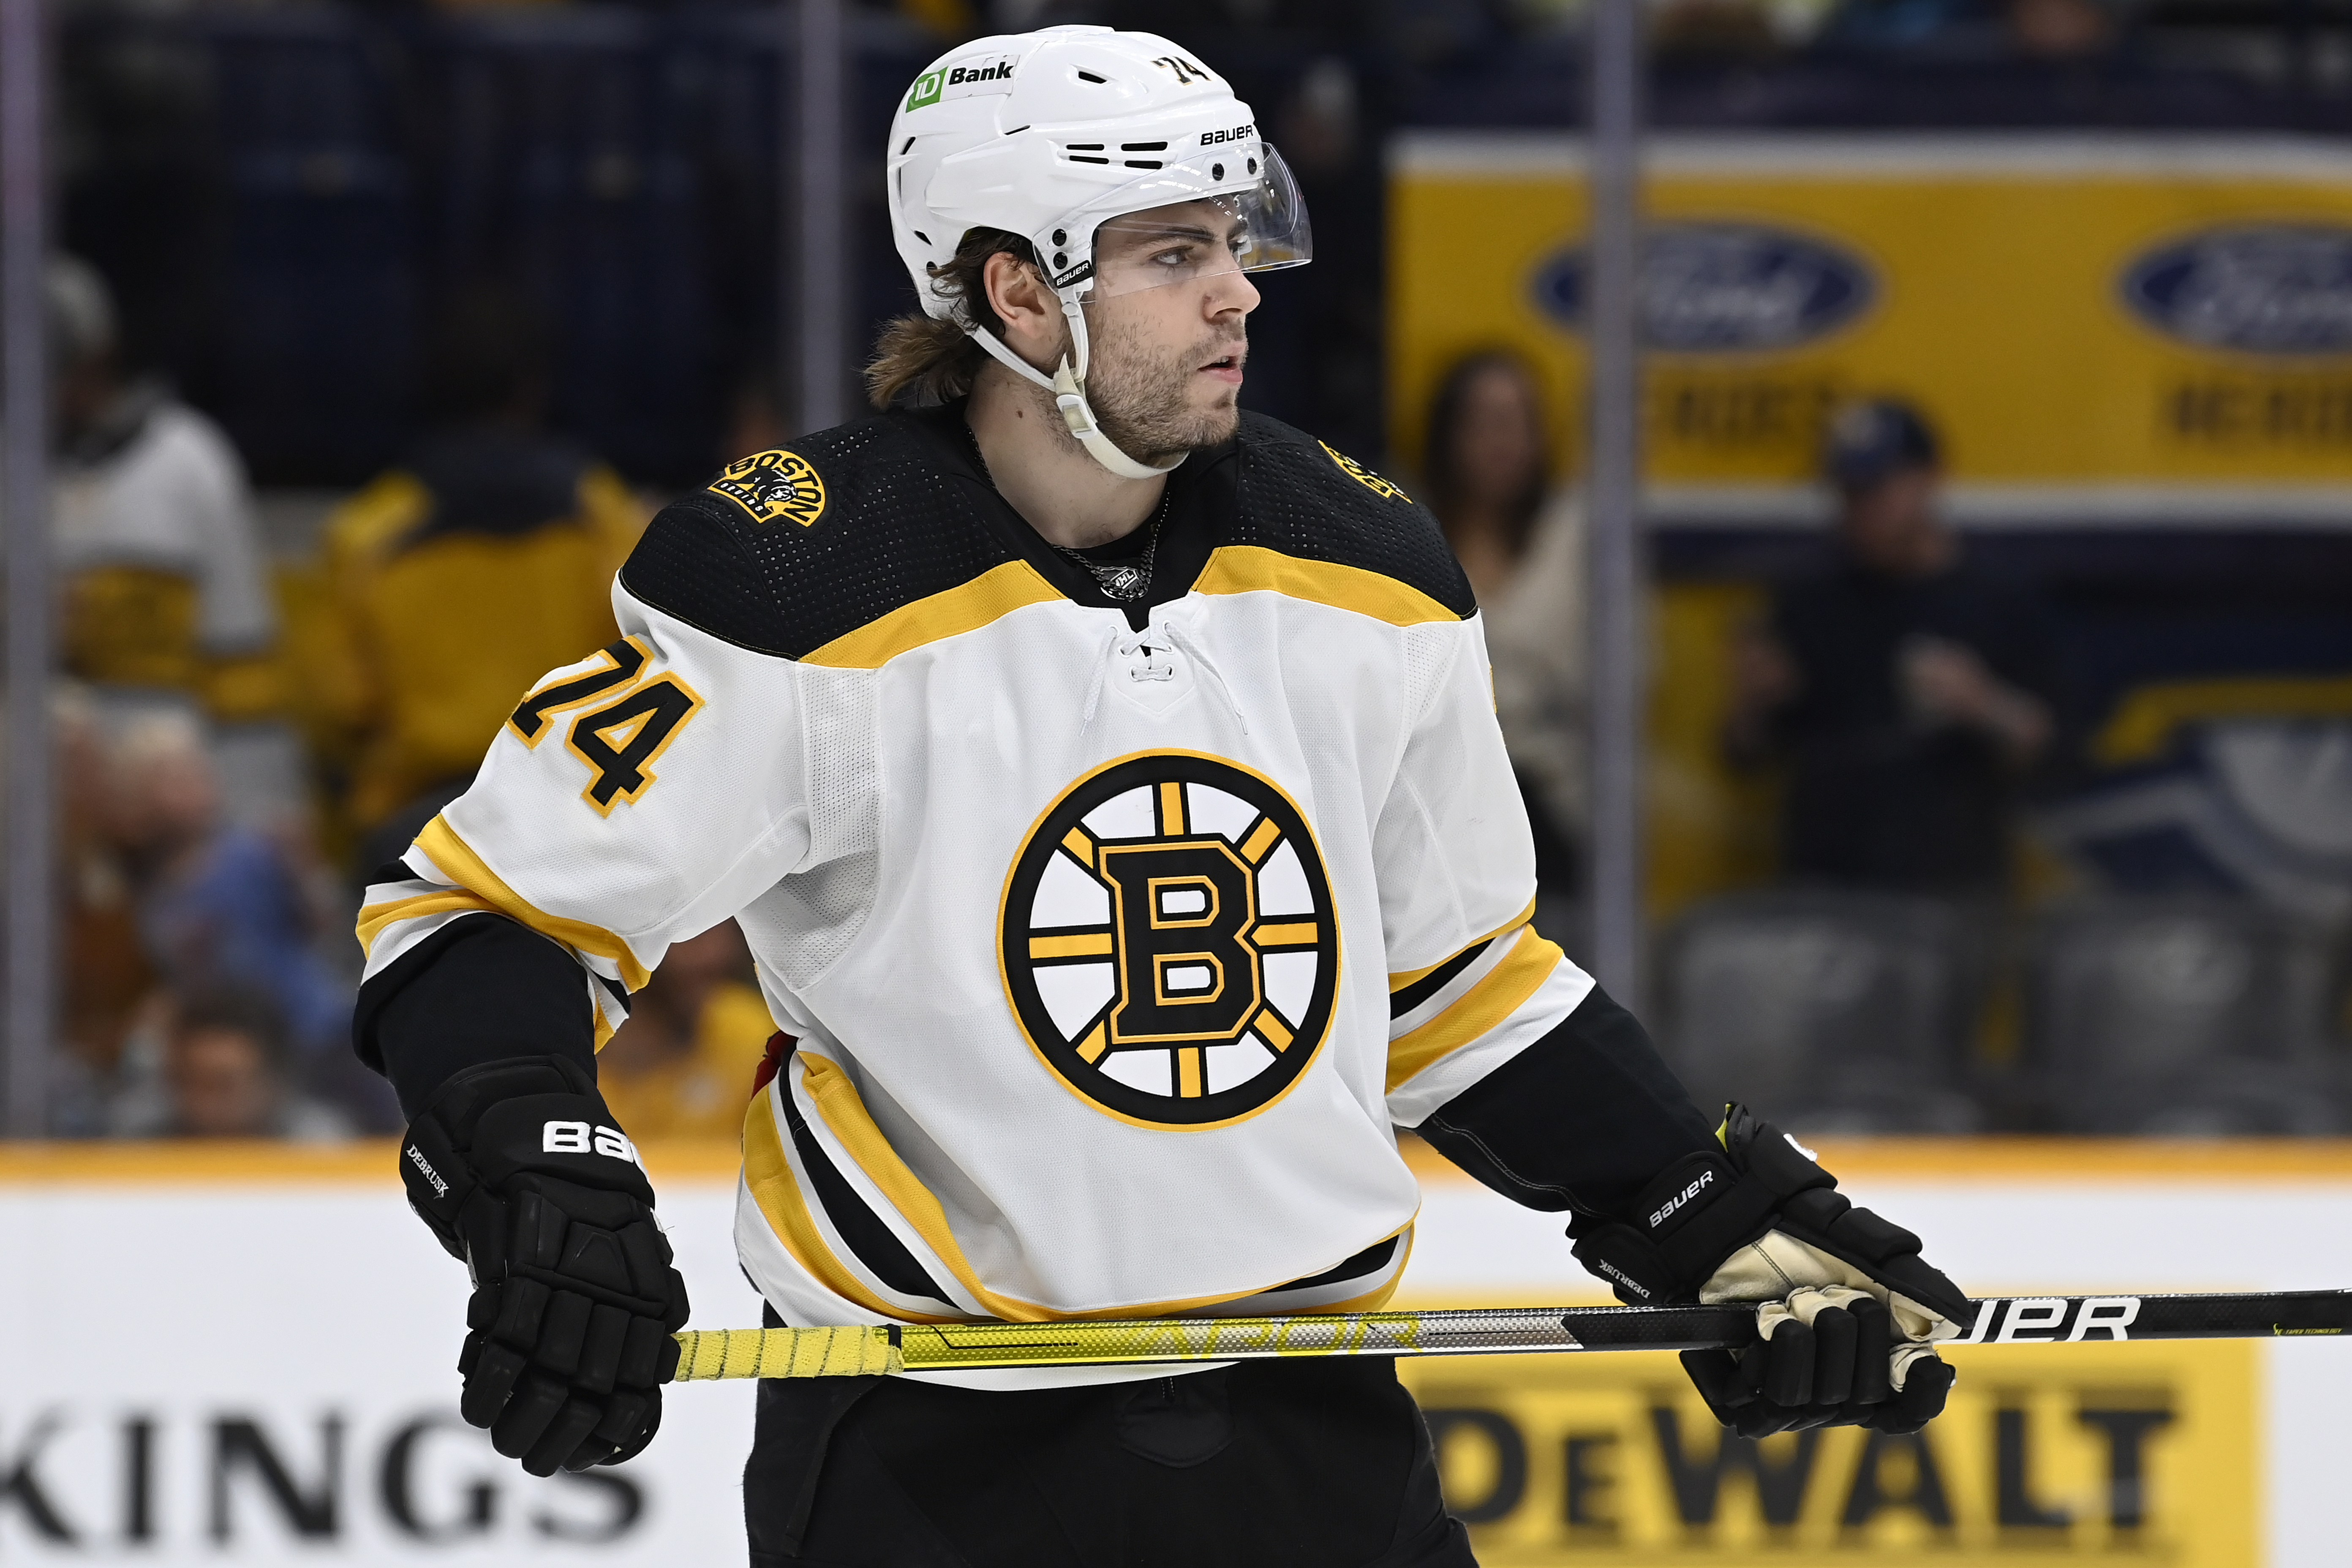 Two Bruins rookies scored their first NHL goals. Jake DeBrusk's dad was  brought to tears.